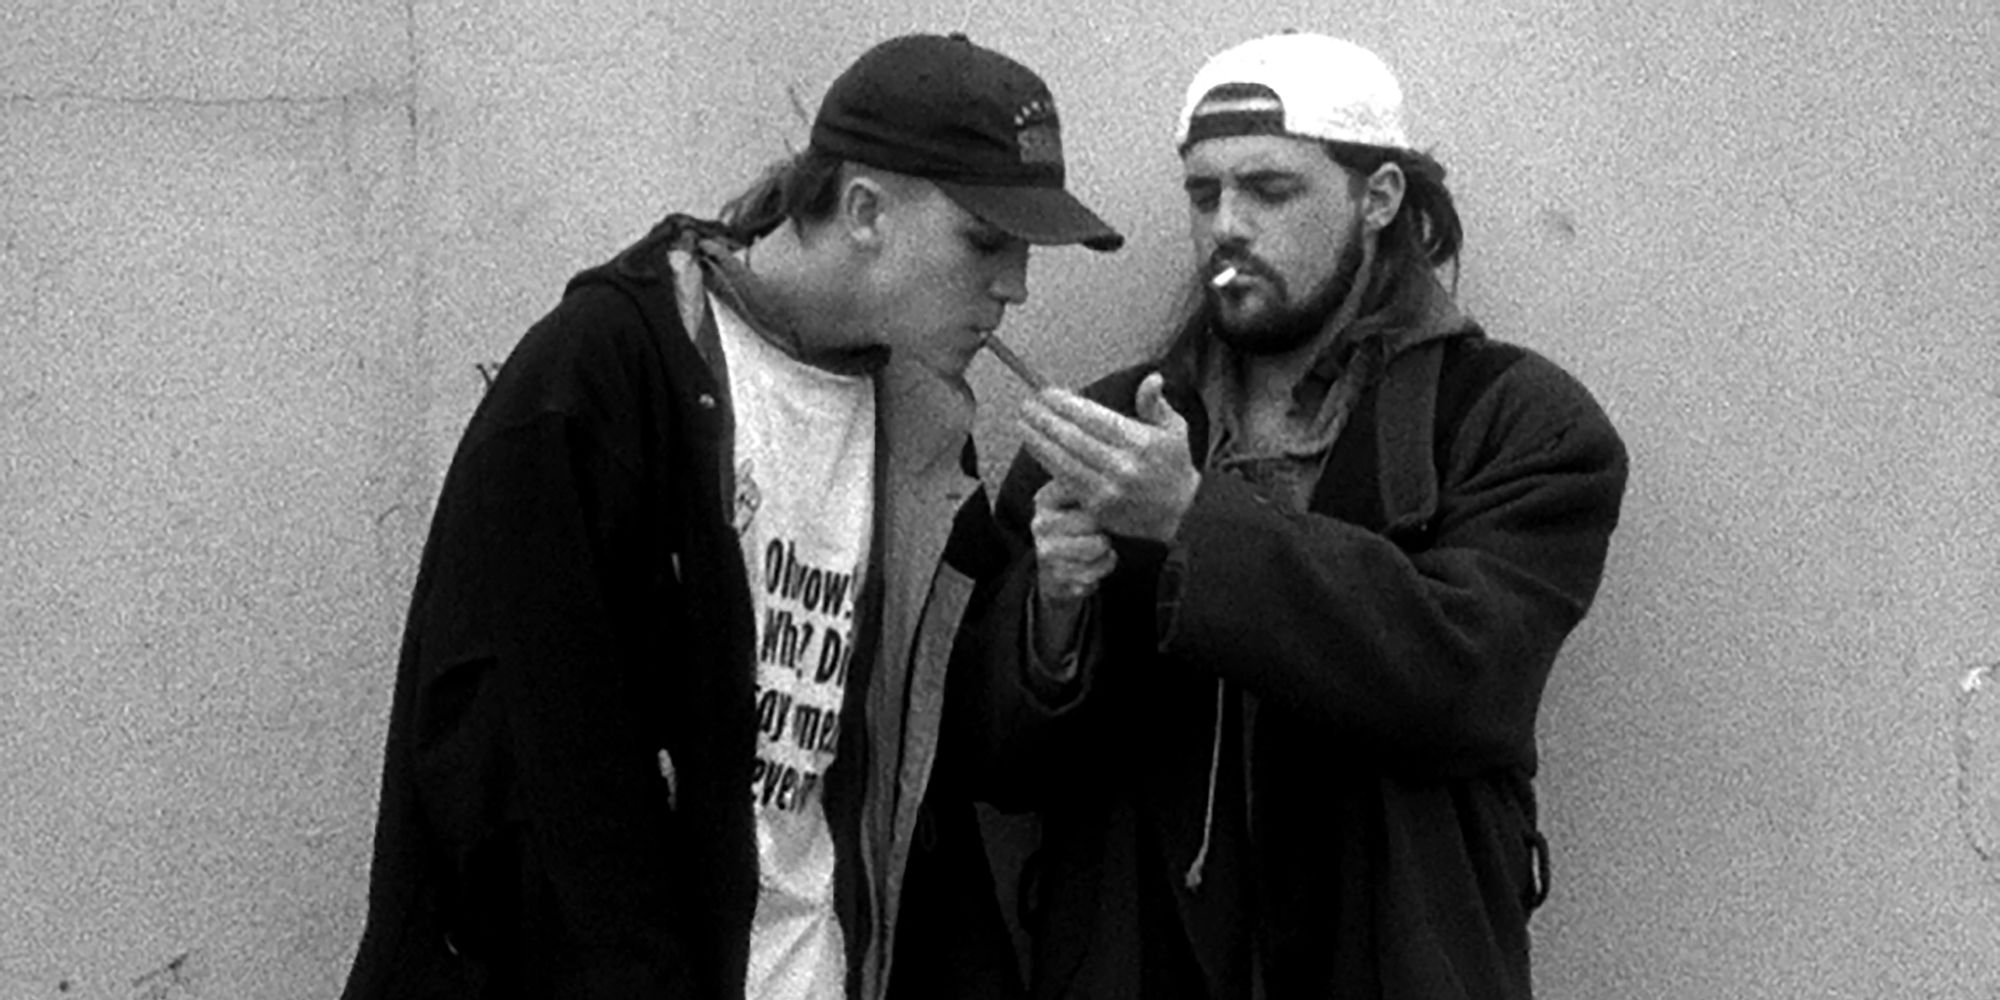 The original ending of 'Clerks' was re-shot by director Kevin Smith after investors told him it was too dark